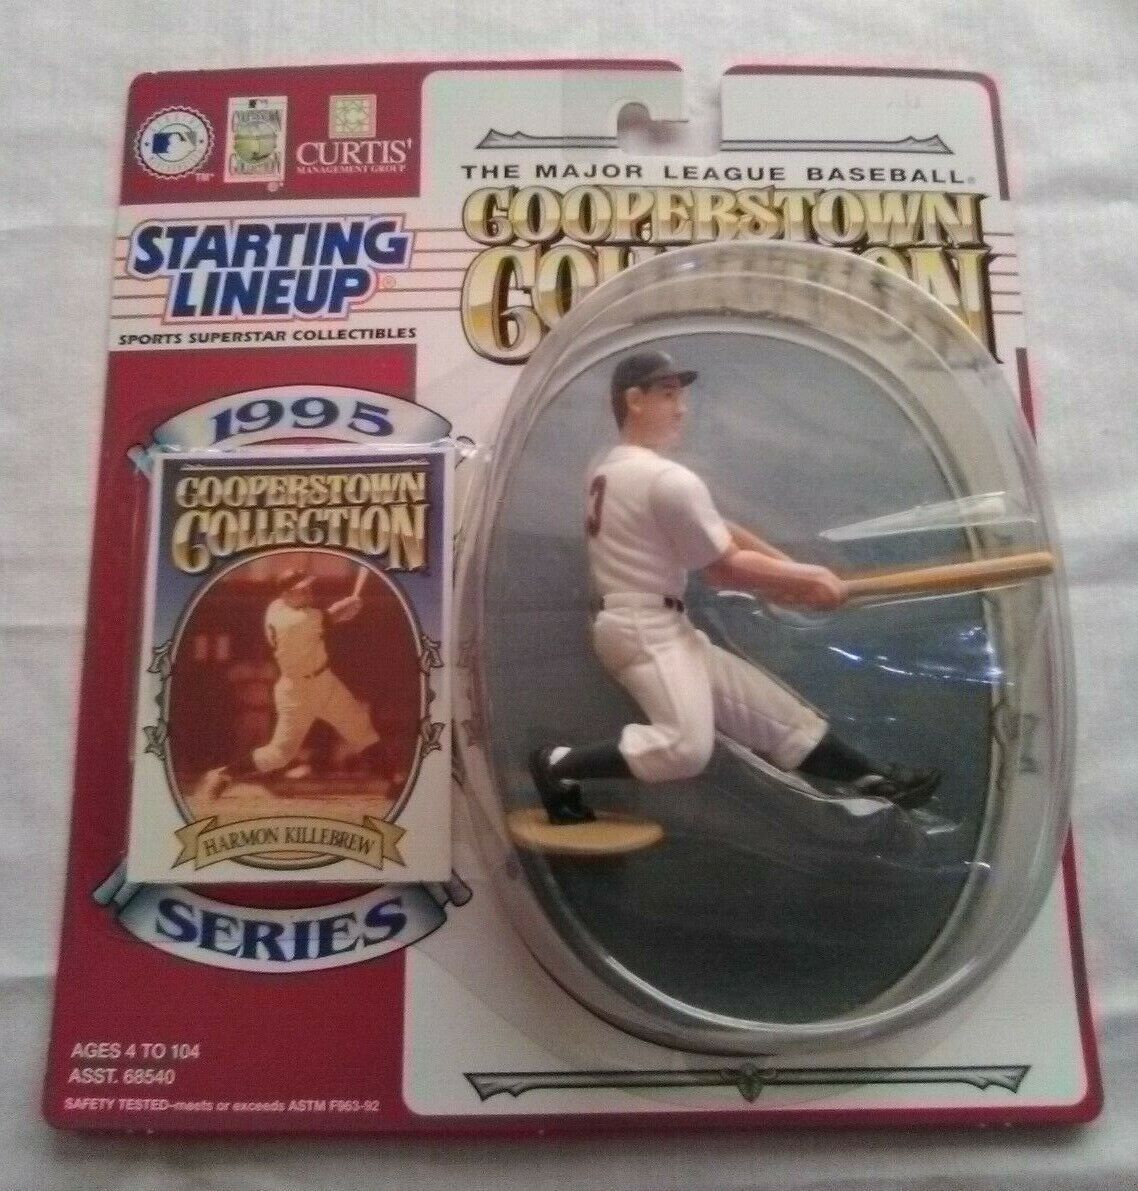 Harmon Killebrew Figurine Card Starting Lineup Cooperstown Collection 1995 - $19.11